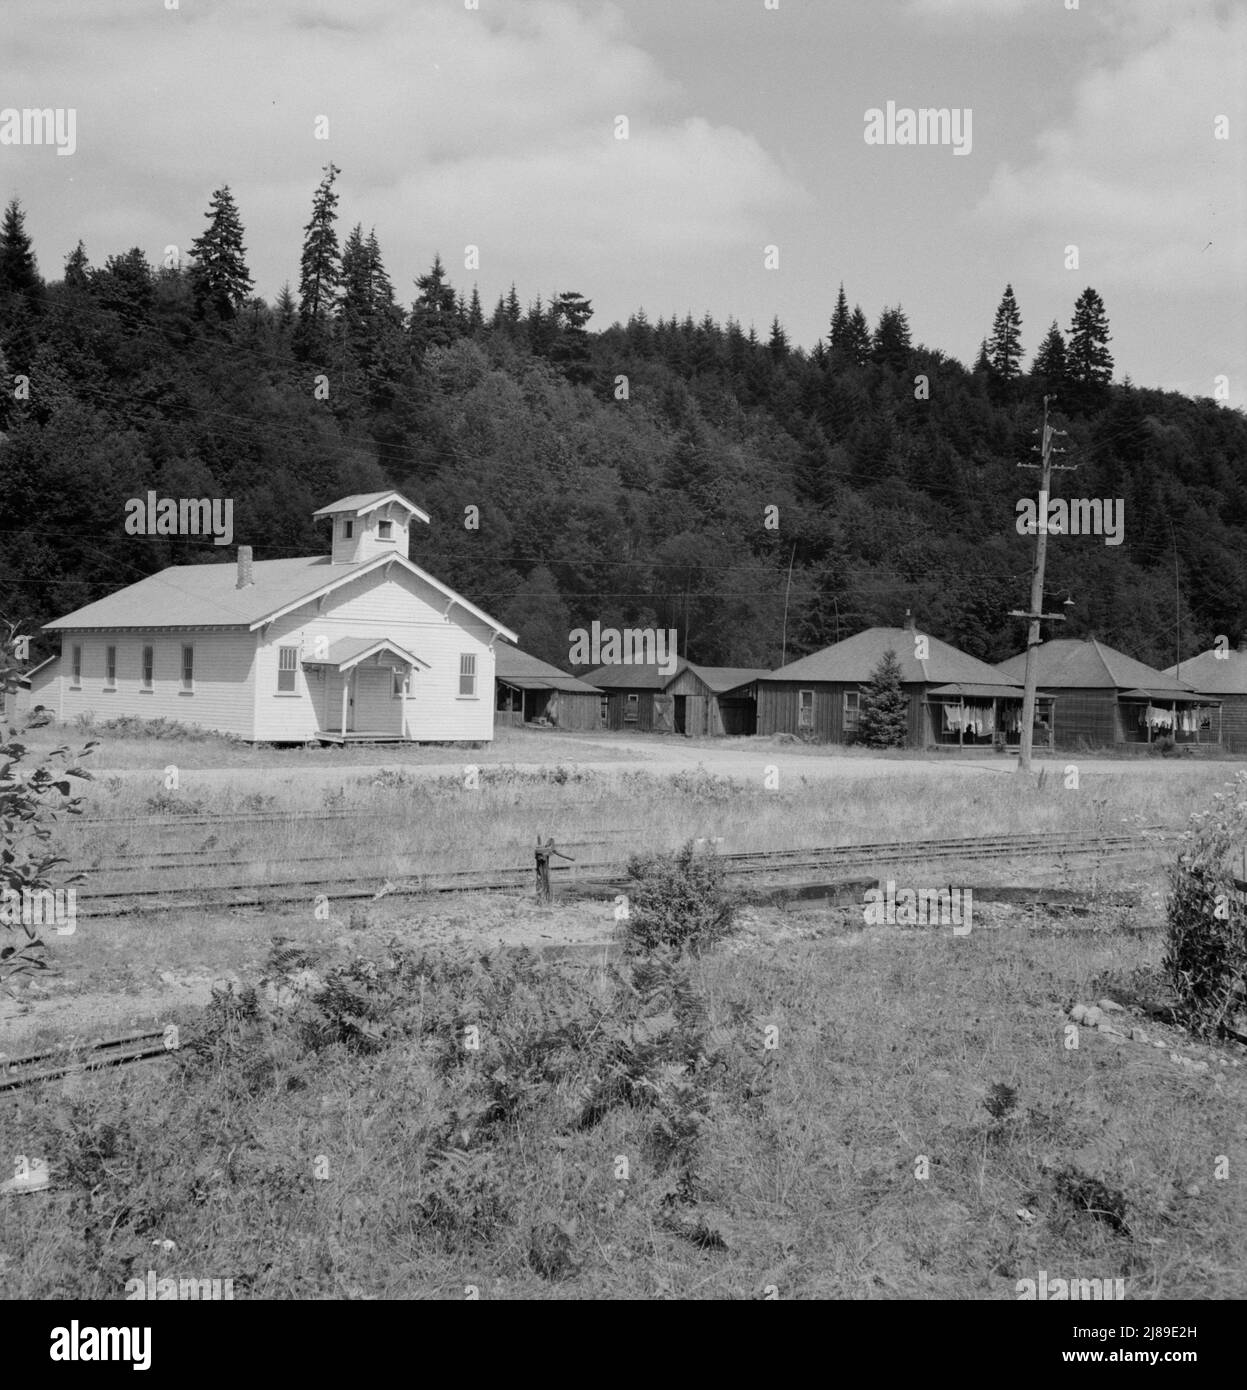 [Untitled, possibly related to: The church closed when the mill closed, but the houses are again occupied in the abandoned mill village. Washington, Grays Harbor County, Malone. Stock Photo